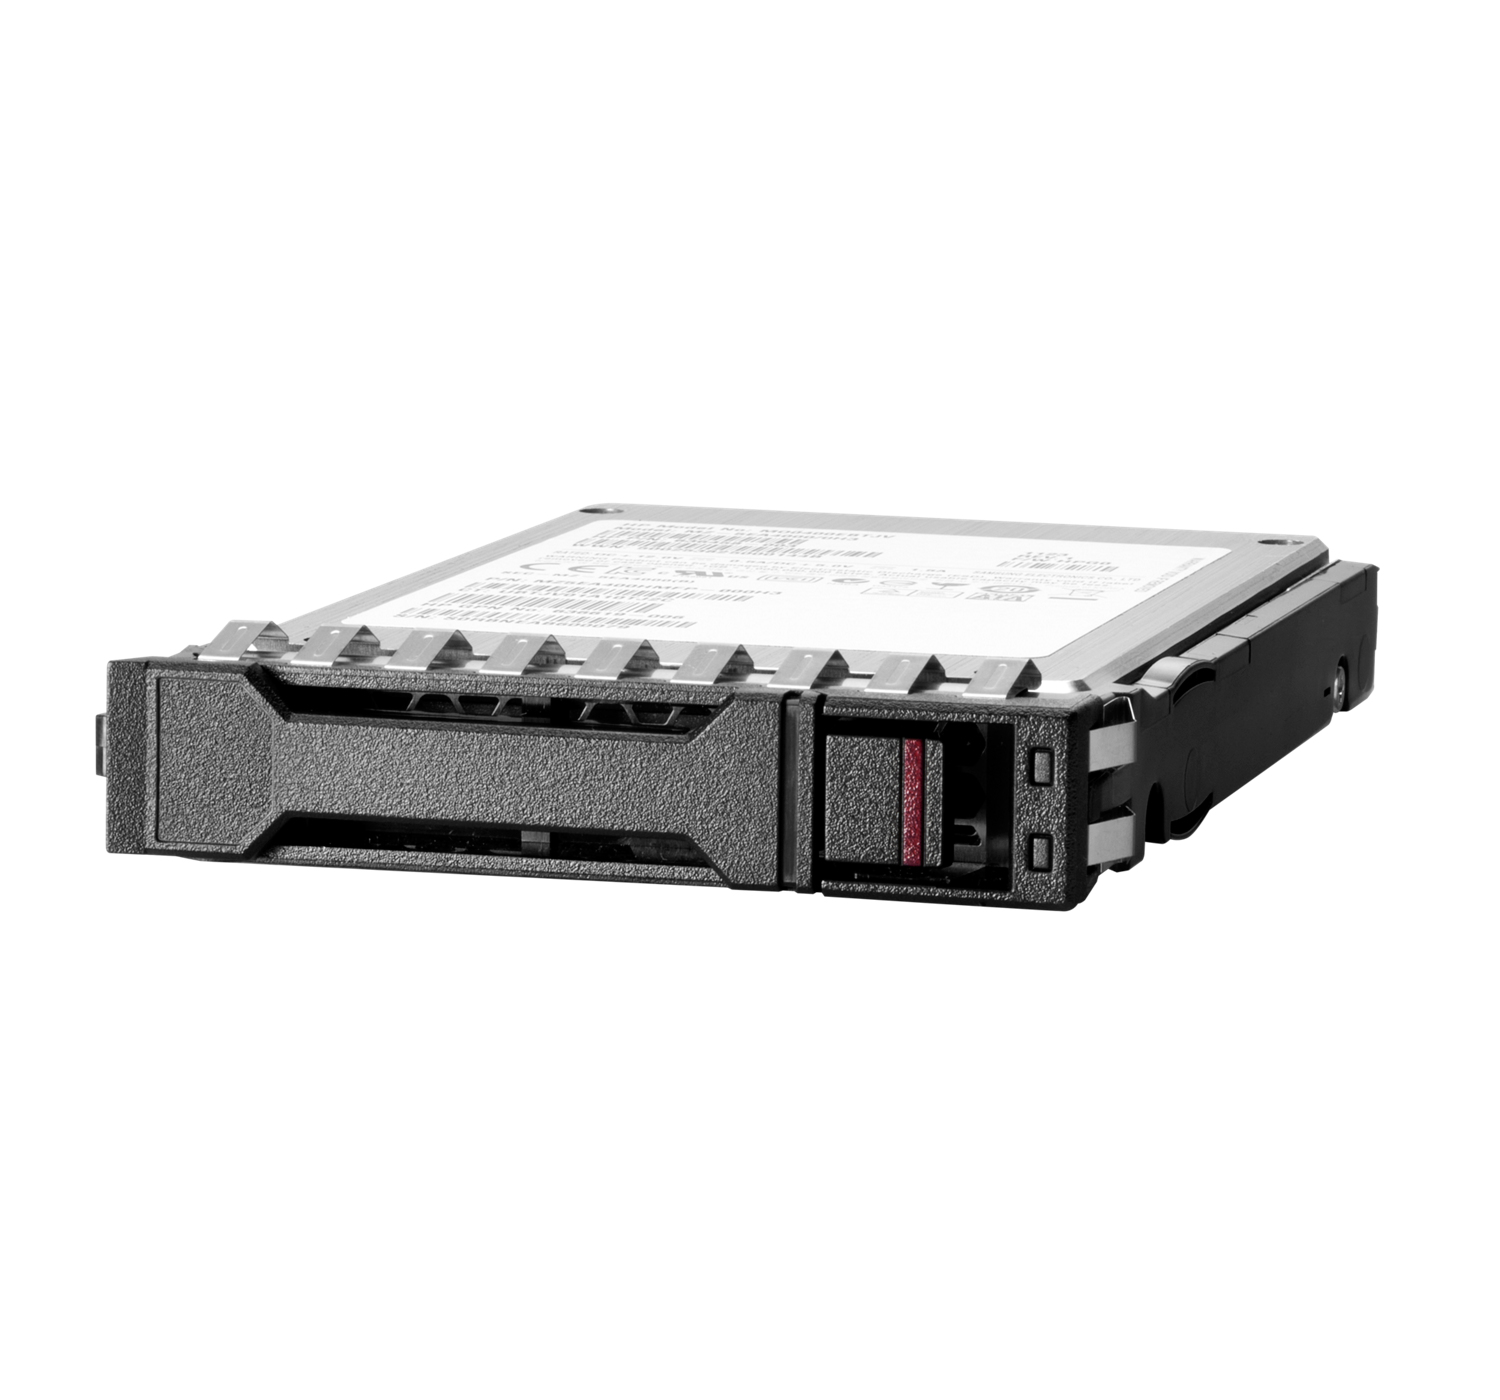 HPE Mixed Use - SSD - 1.92 TB - Hot-Swap - 2.5" SFF (6.4 cm SFF)